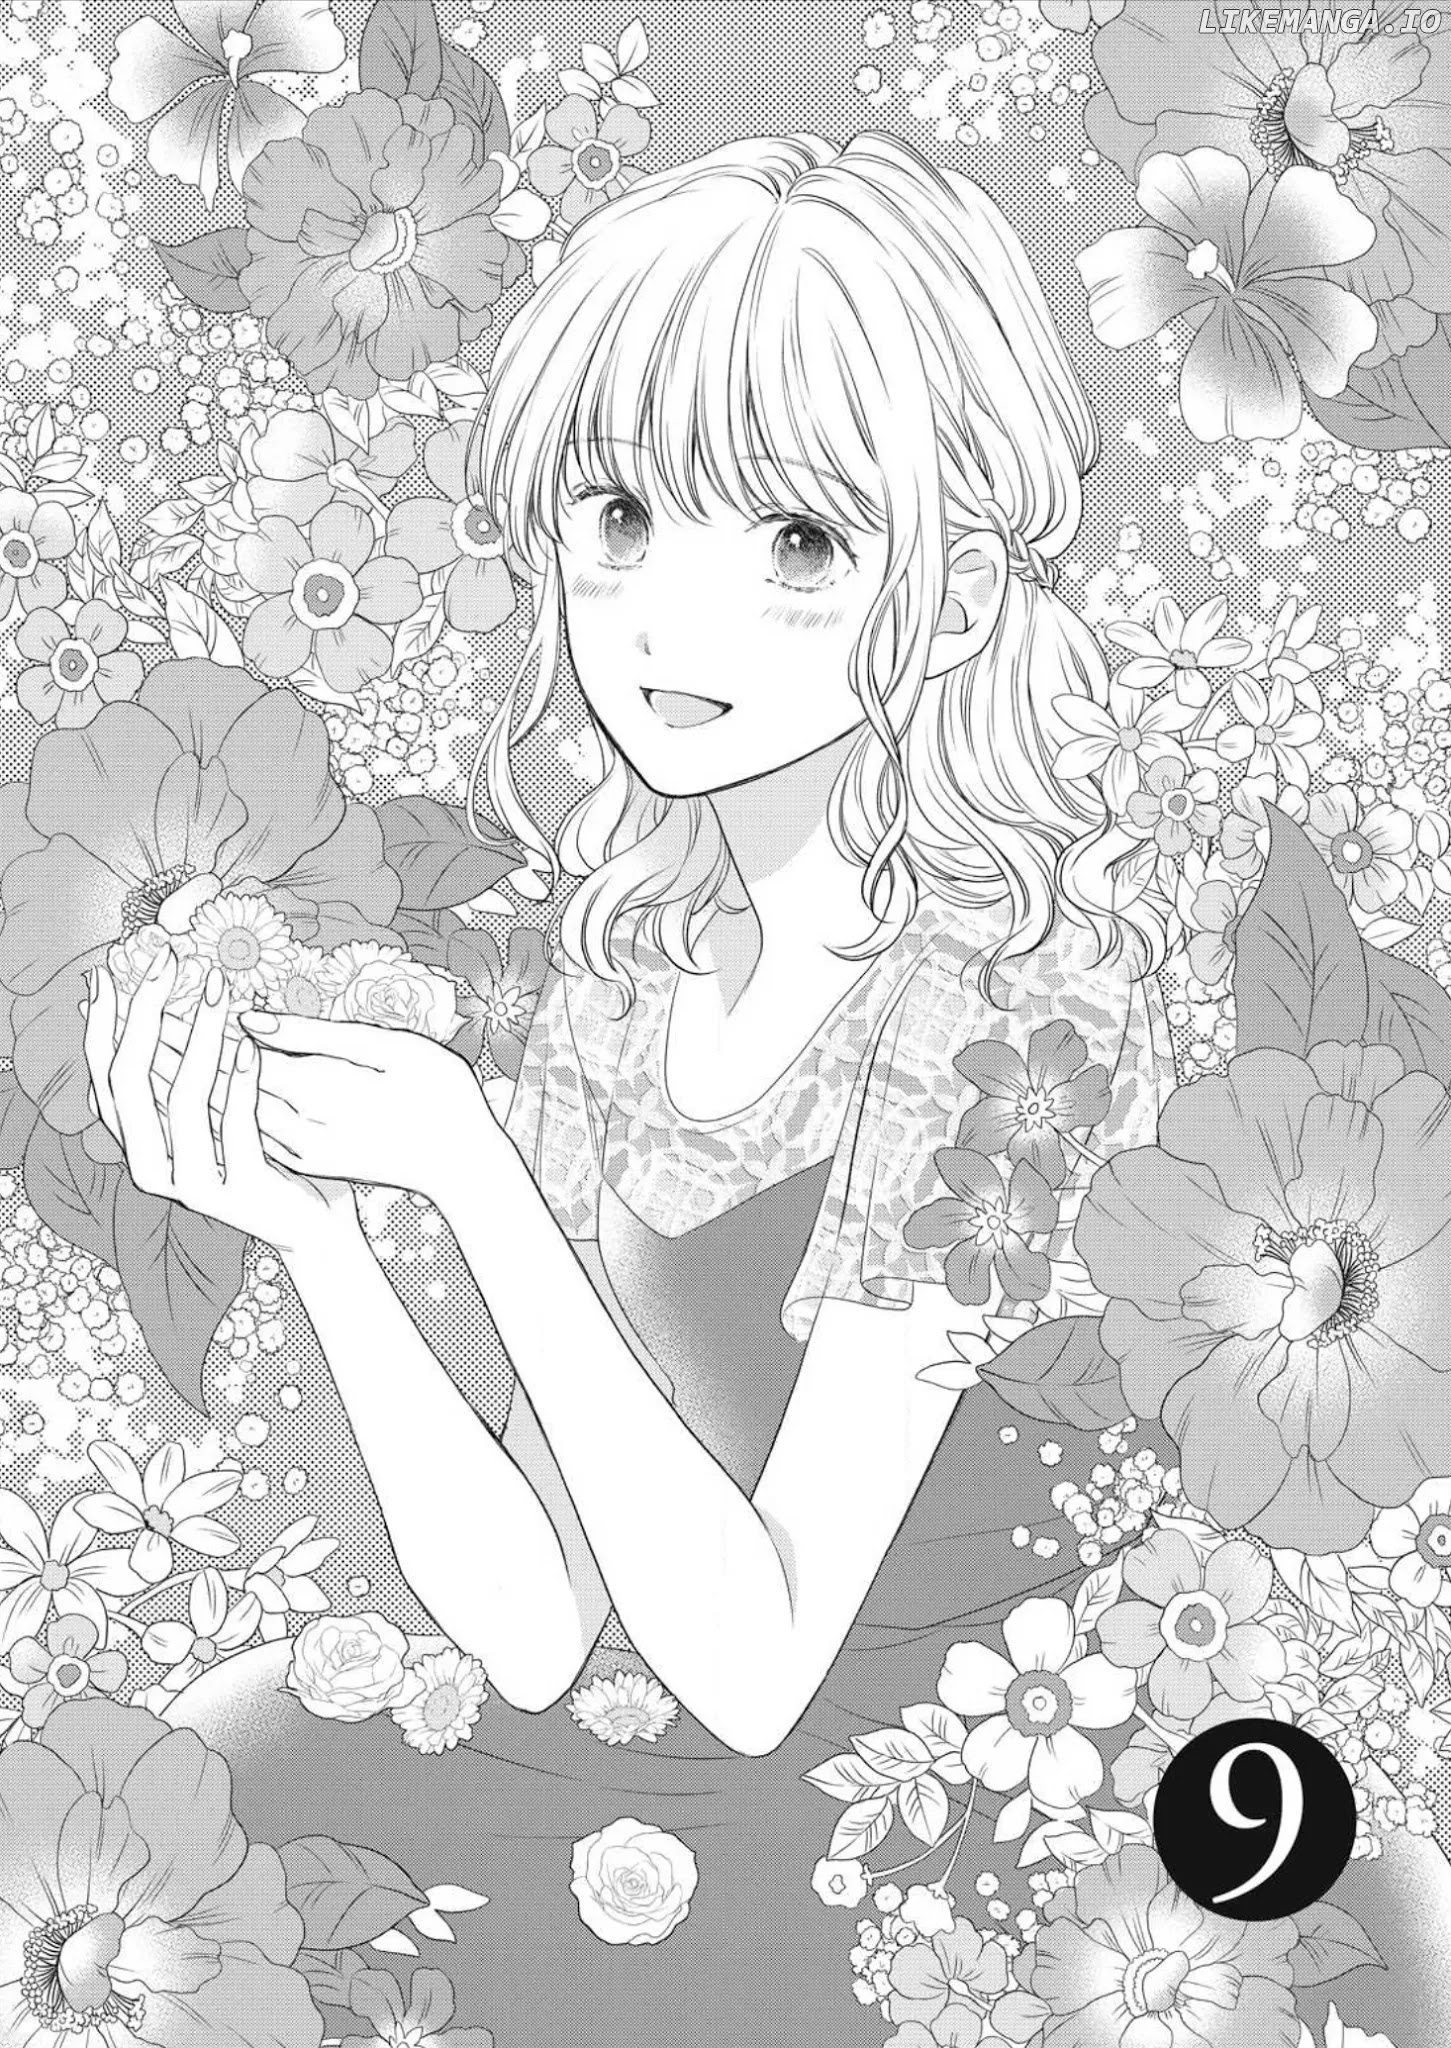 Hana Wants This Flower To Bloom! chapter 9 - page 2